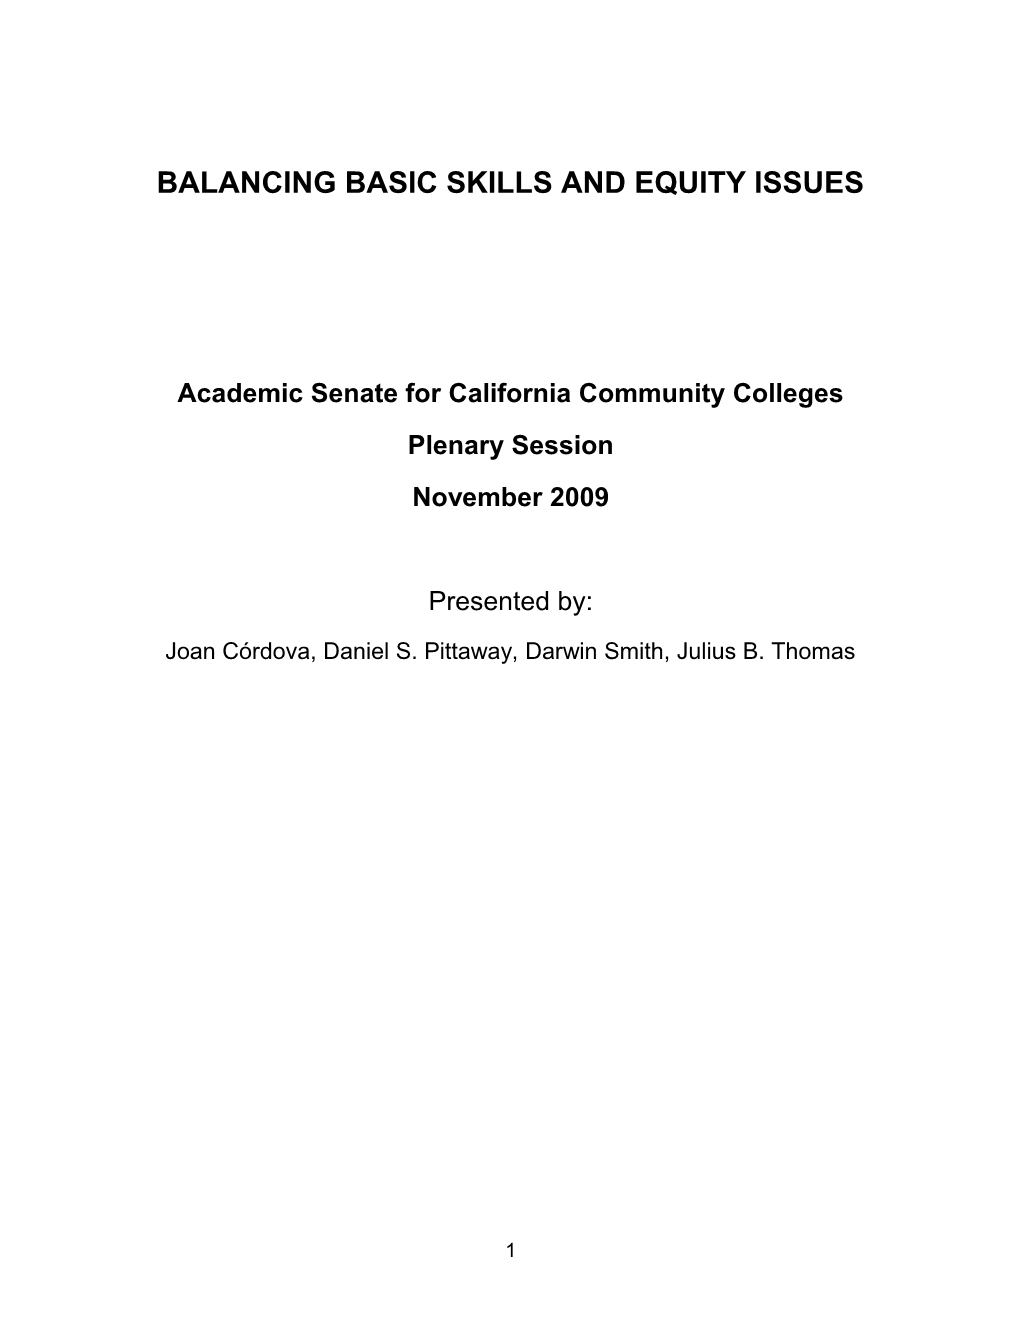 Balancing Basic Skills and Equity Issues